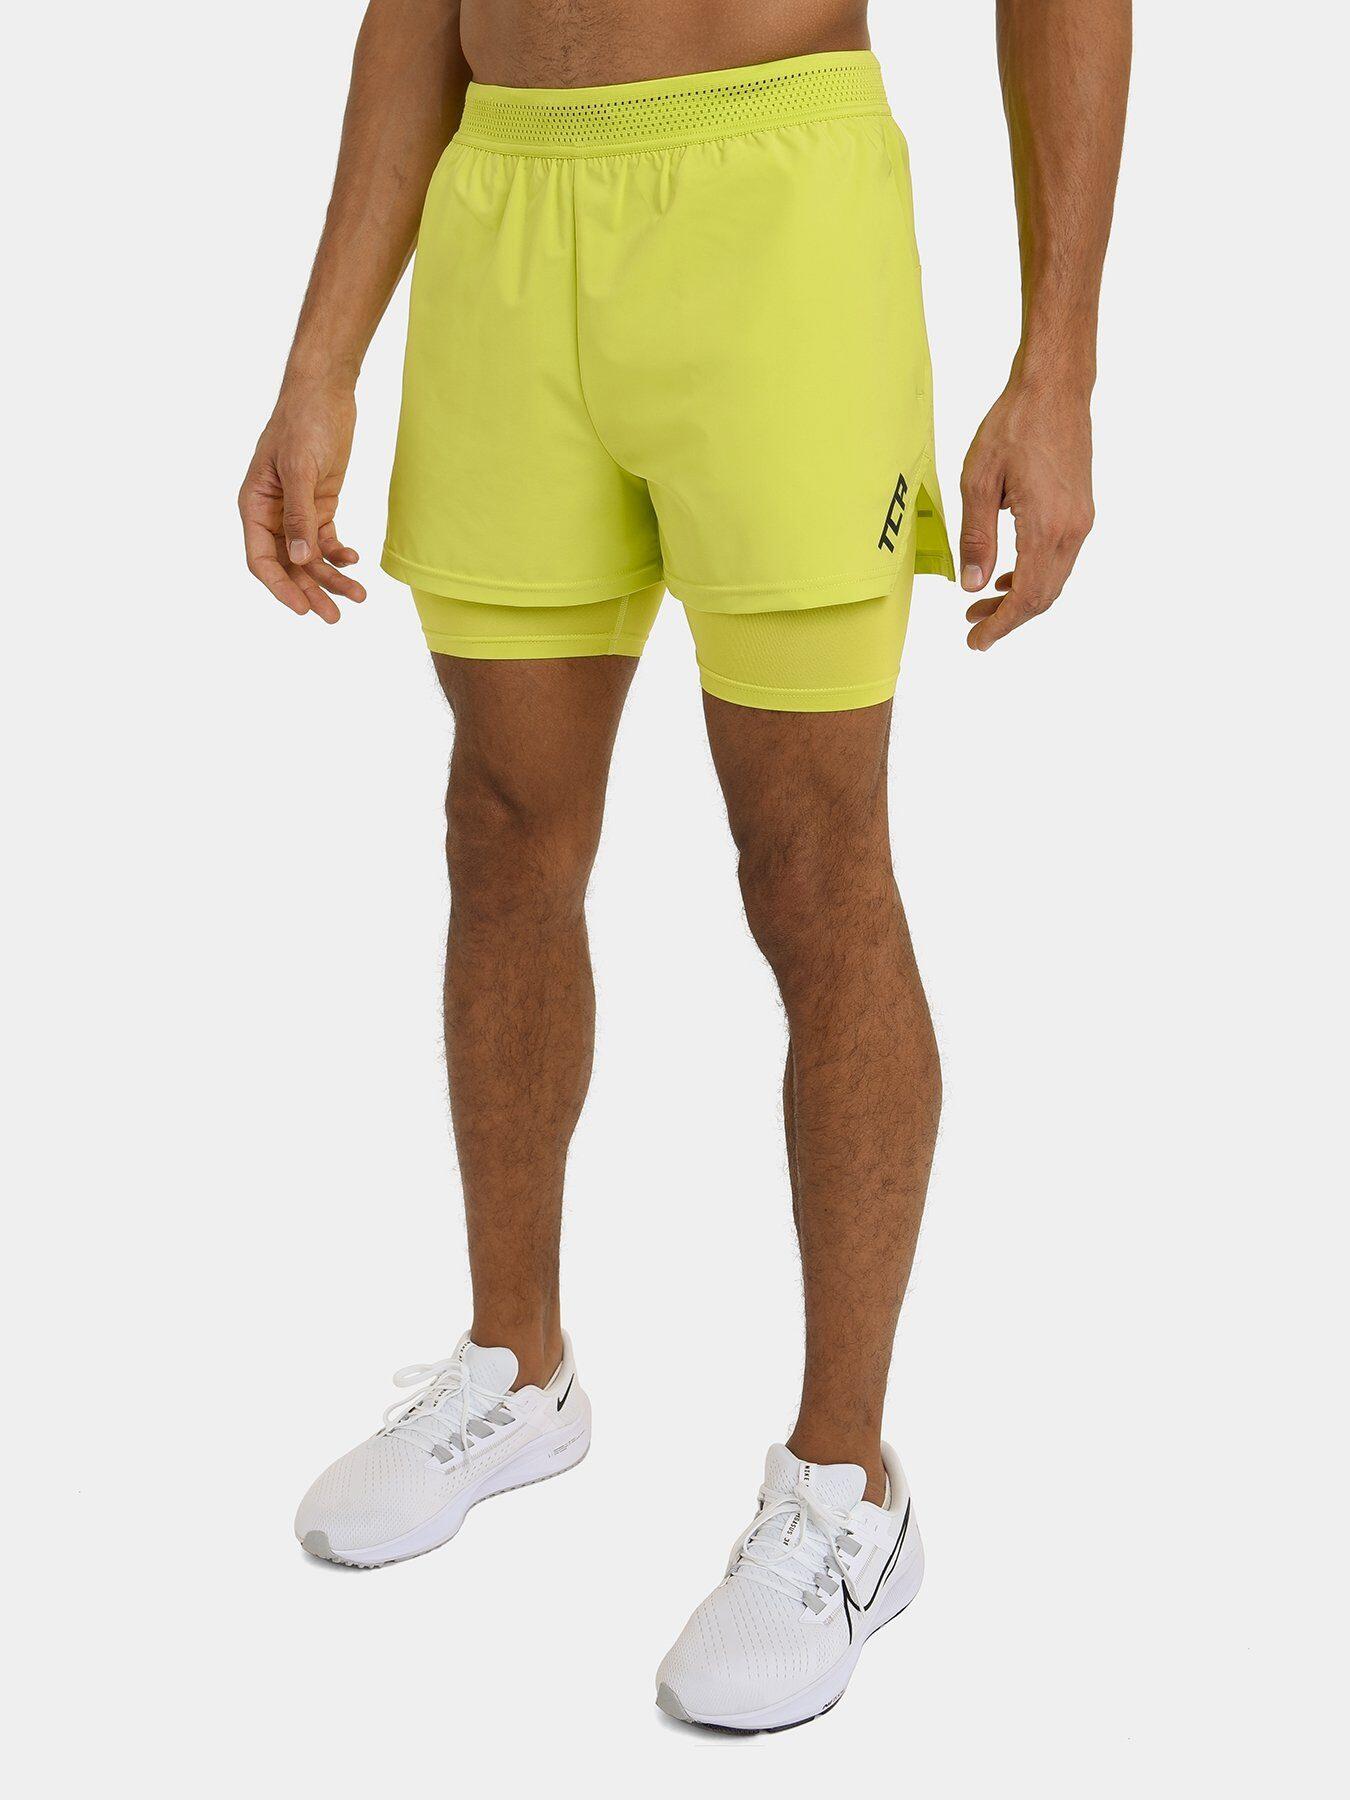 TCA Men's Lightweight 2-in-1 Running Shorts - Lime Punch